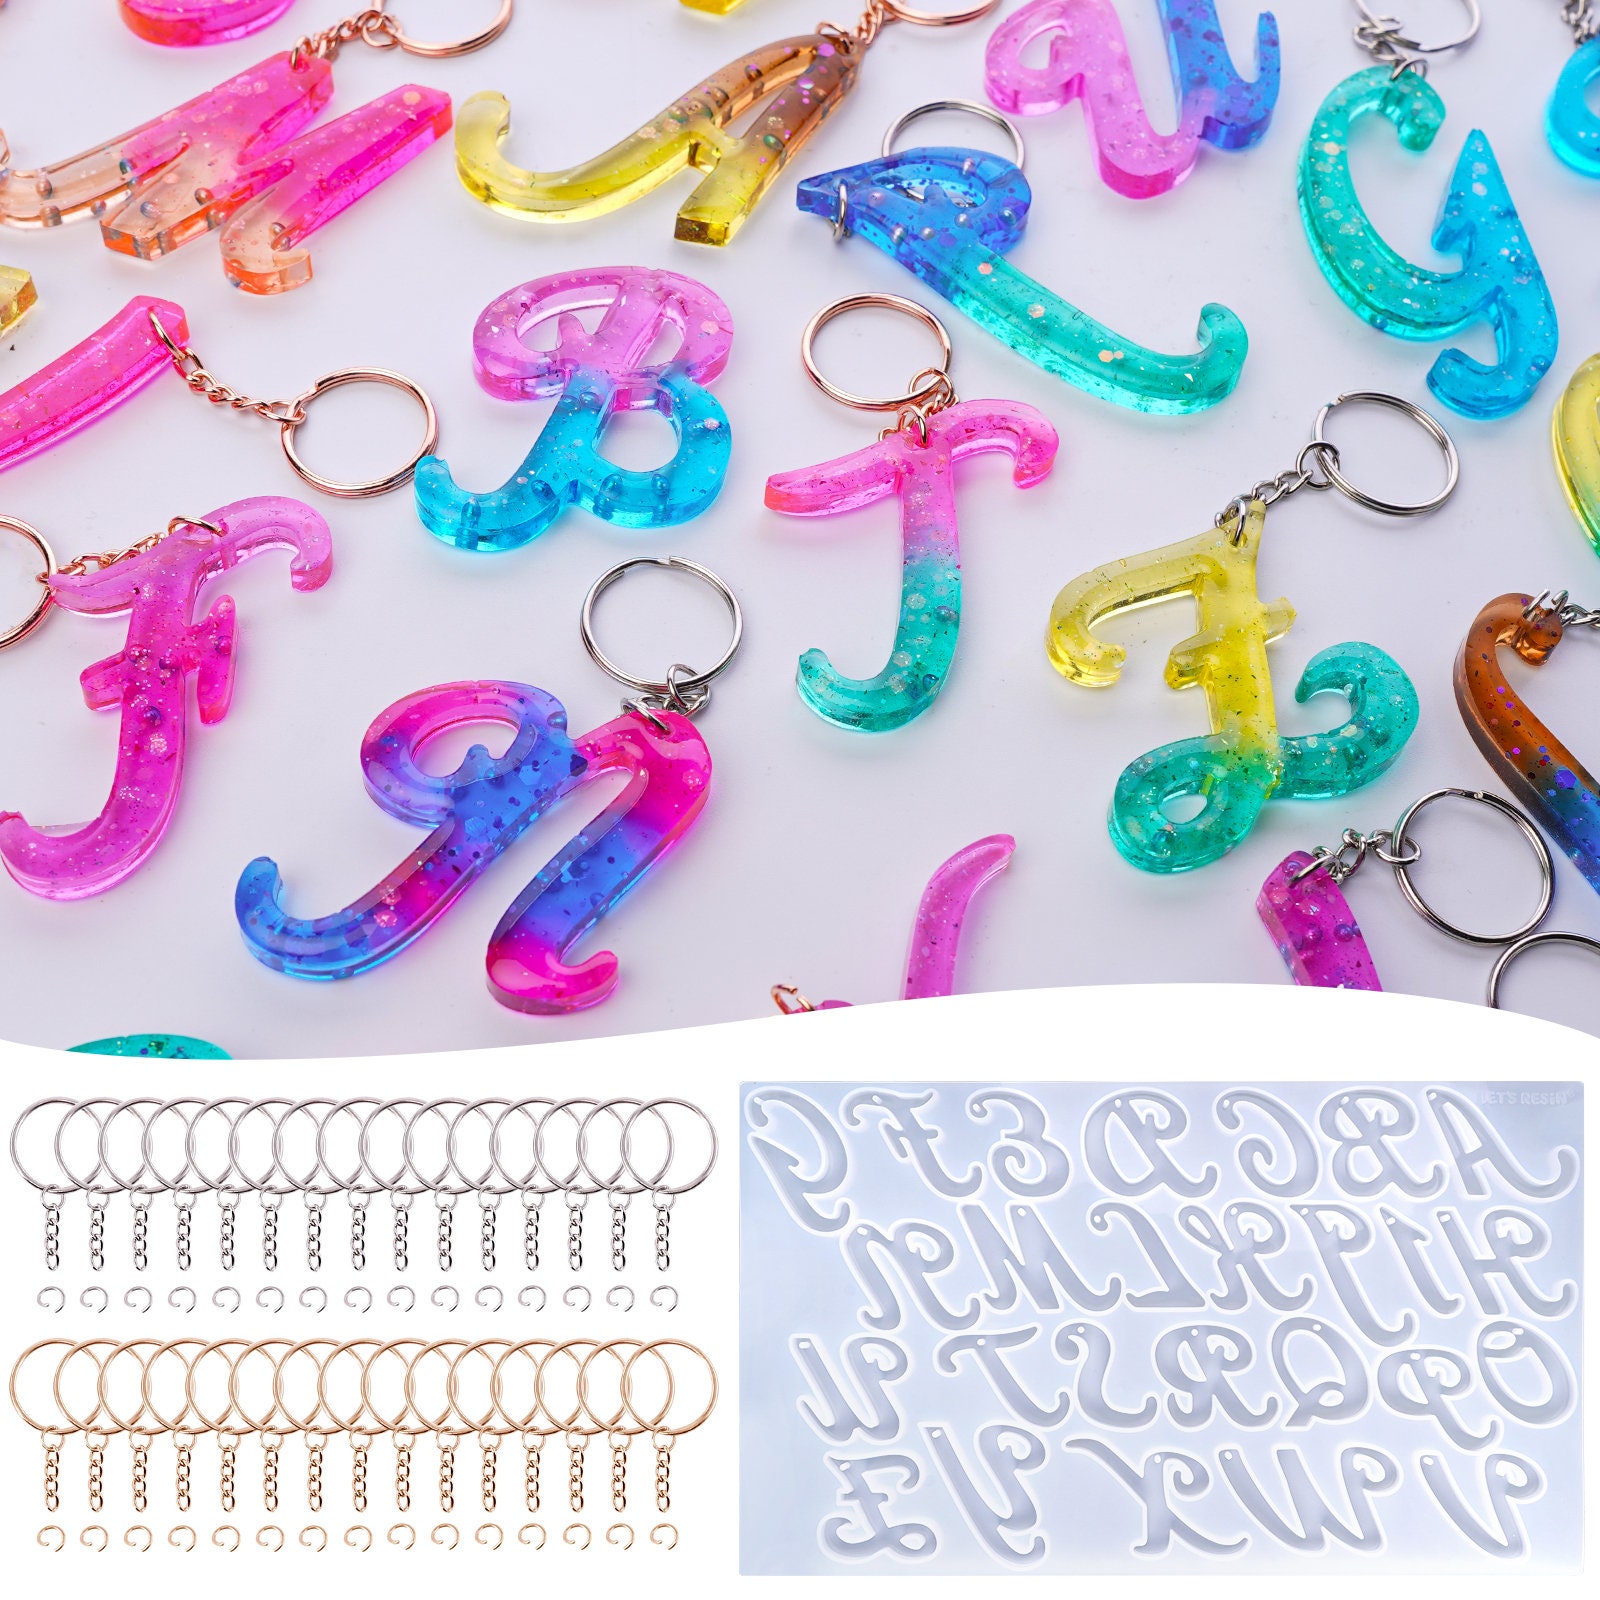 Alphabet Keychain Molds with Hole - Large Alphabet Epoxy Resin Silicone  Molds,Letter Molds,Keychain,Jewelry,Pendant Making – Let's Resin